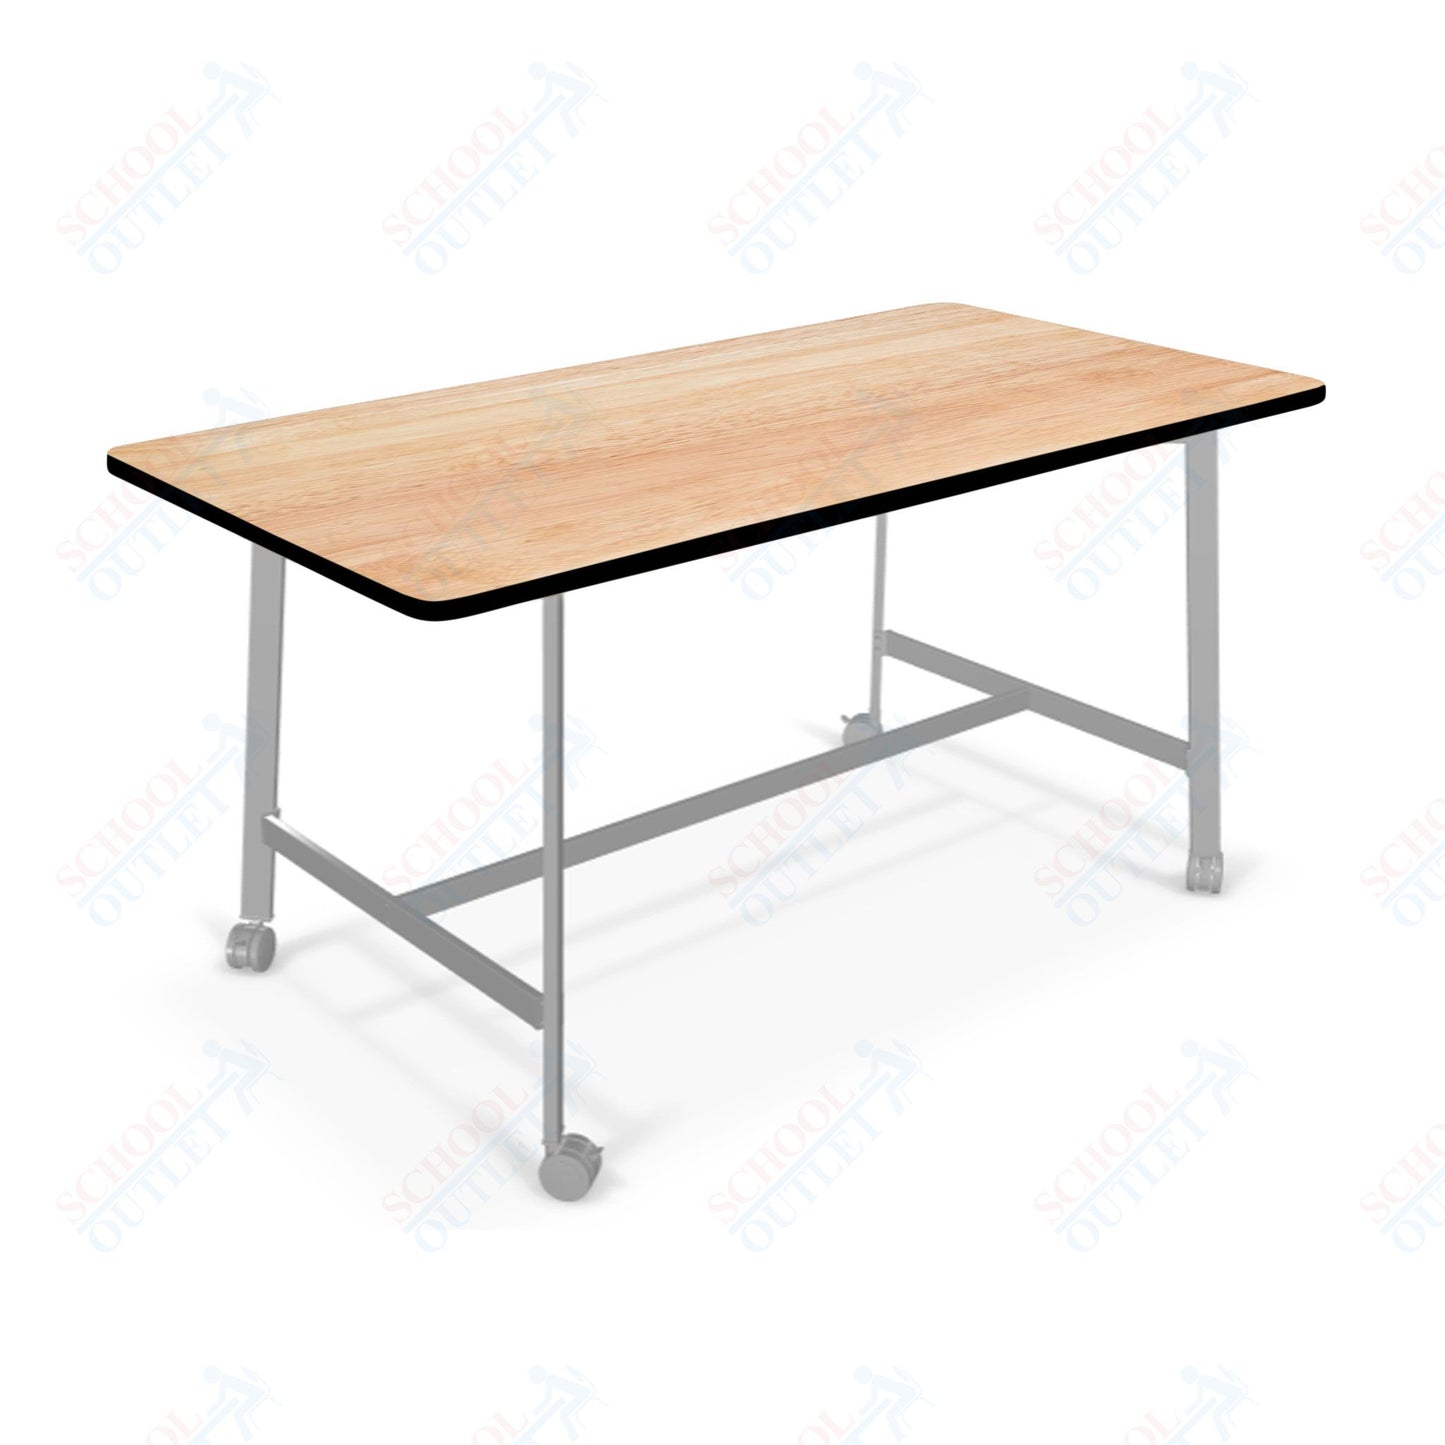 Mooreco Akt Table – 30"D x 72"W Rectangle, Laminate or Butcher Block Top, Fixed Height Available in 29"H, 36"H, or 42"H